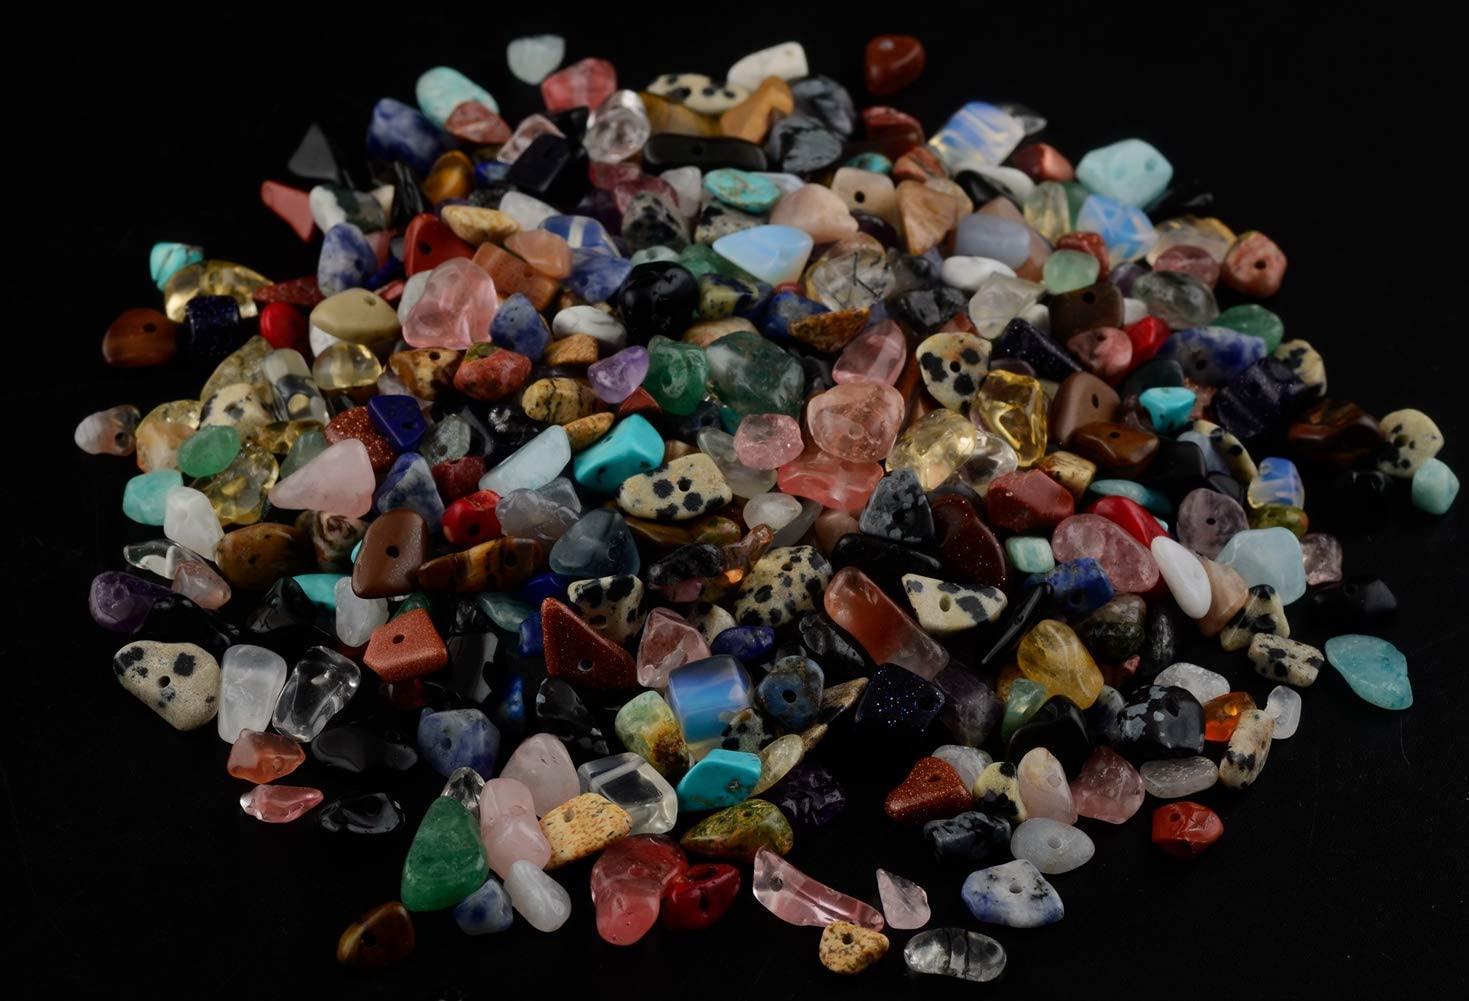 500pcs Natural Chip Stone Beads Multicolor 5mm to 8mm Irregular Gemstone  Healing Crystal Loose Rocks Bead Hole Drilled DIY for Bracelet Necklace